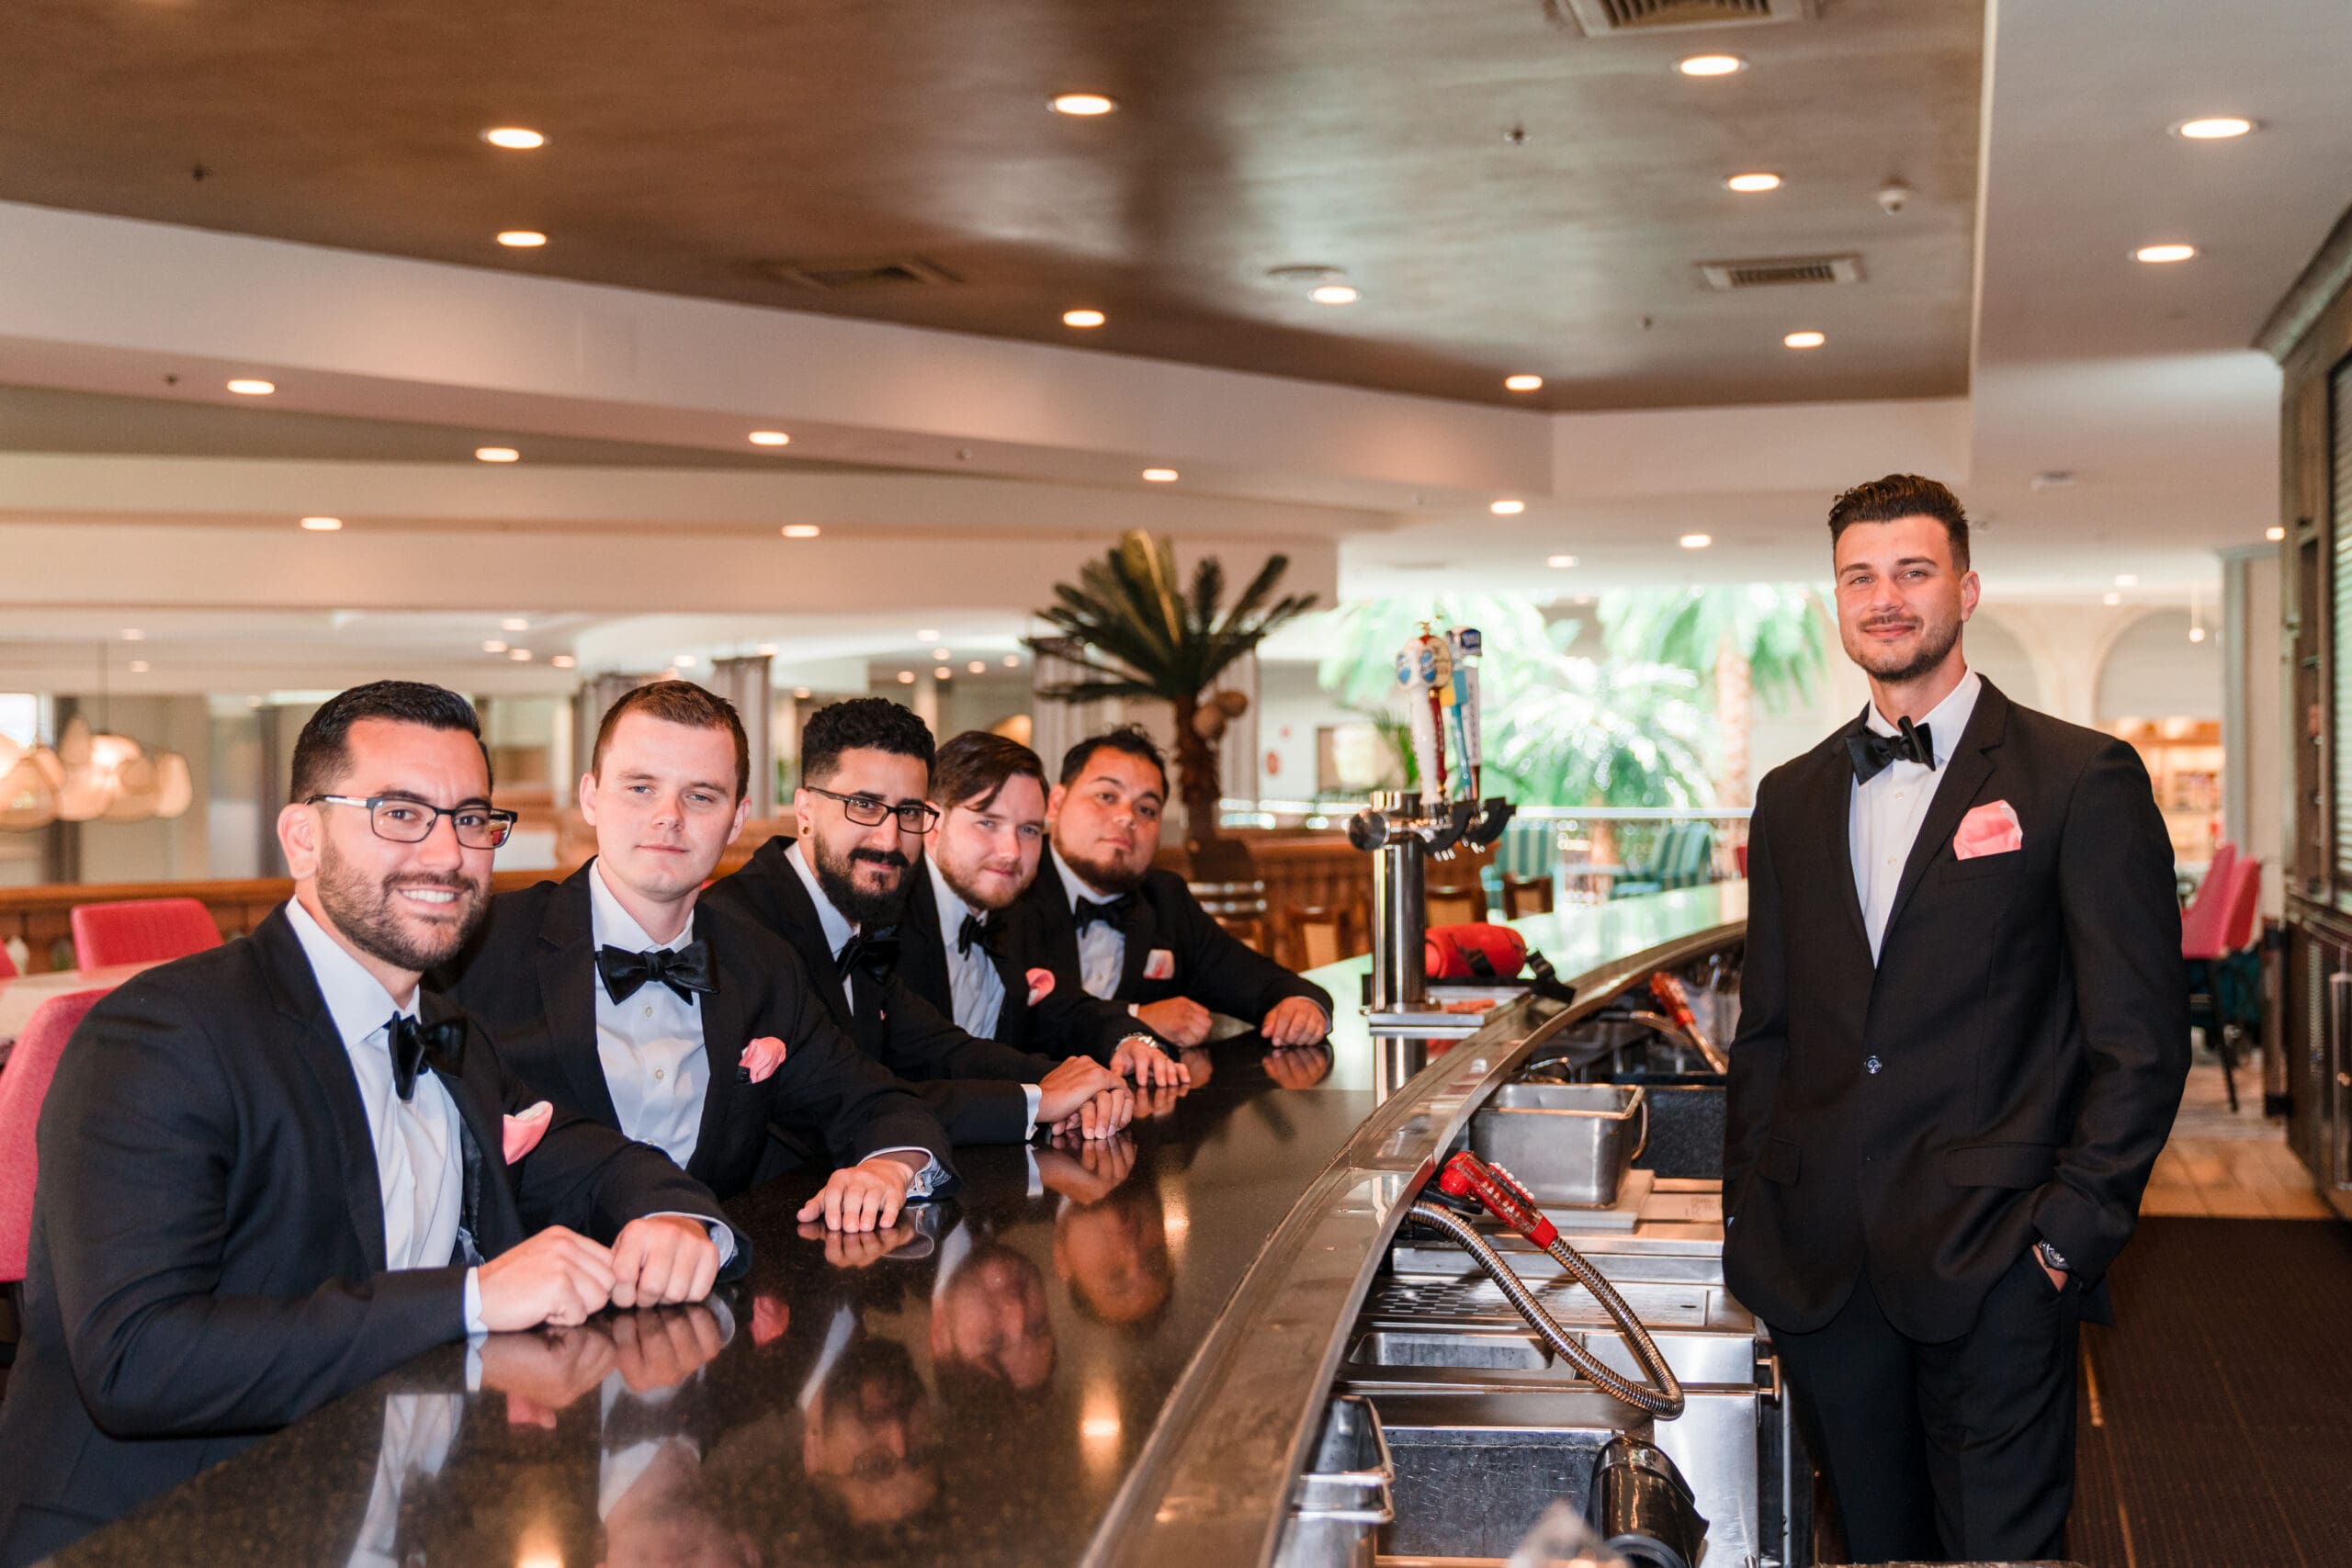 Javier and his groomsmen behind the bar at Caribe Royale Orlando, all wearing matching tuxedos with pink pocket squares.